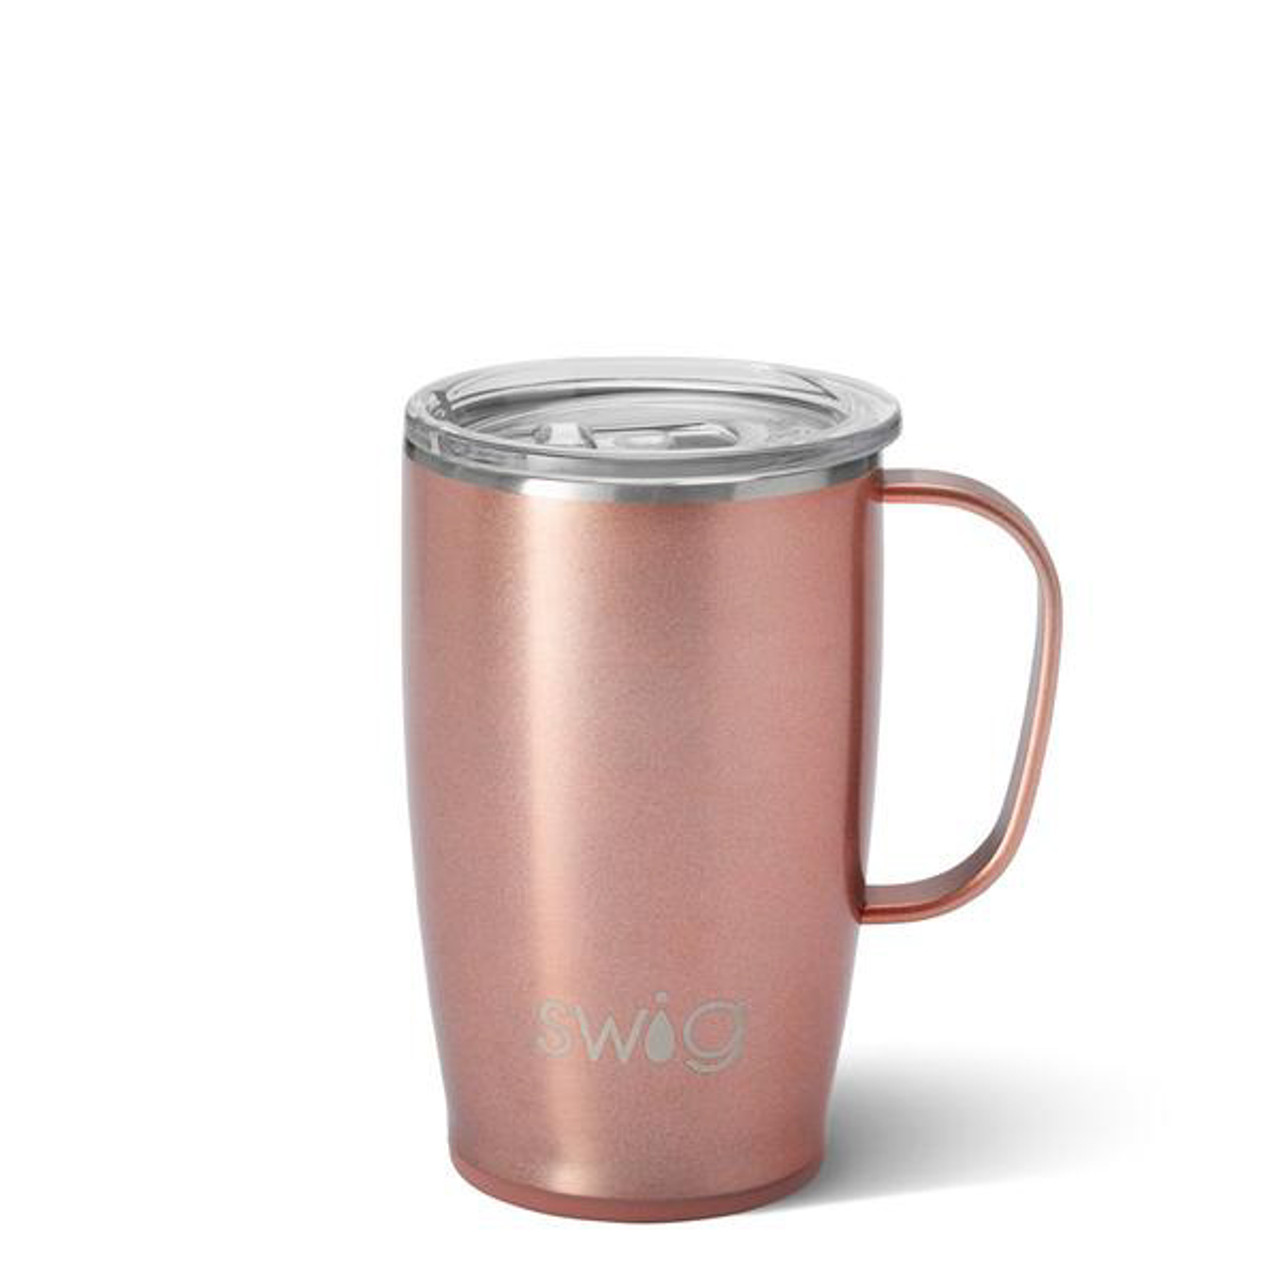 https://cdn11.bigcommerce.com/s-6zwhmb4rdr/images/stencil/1280x1280/products/72059/192634/the-lamp-stand-swig-shimmer-rose-gold-18-oz-travel-mug-s101-c18-rs-1__44317.1636726109.jpg?c=1